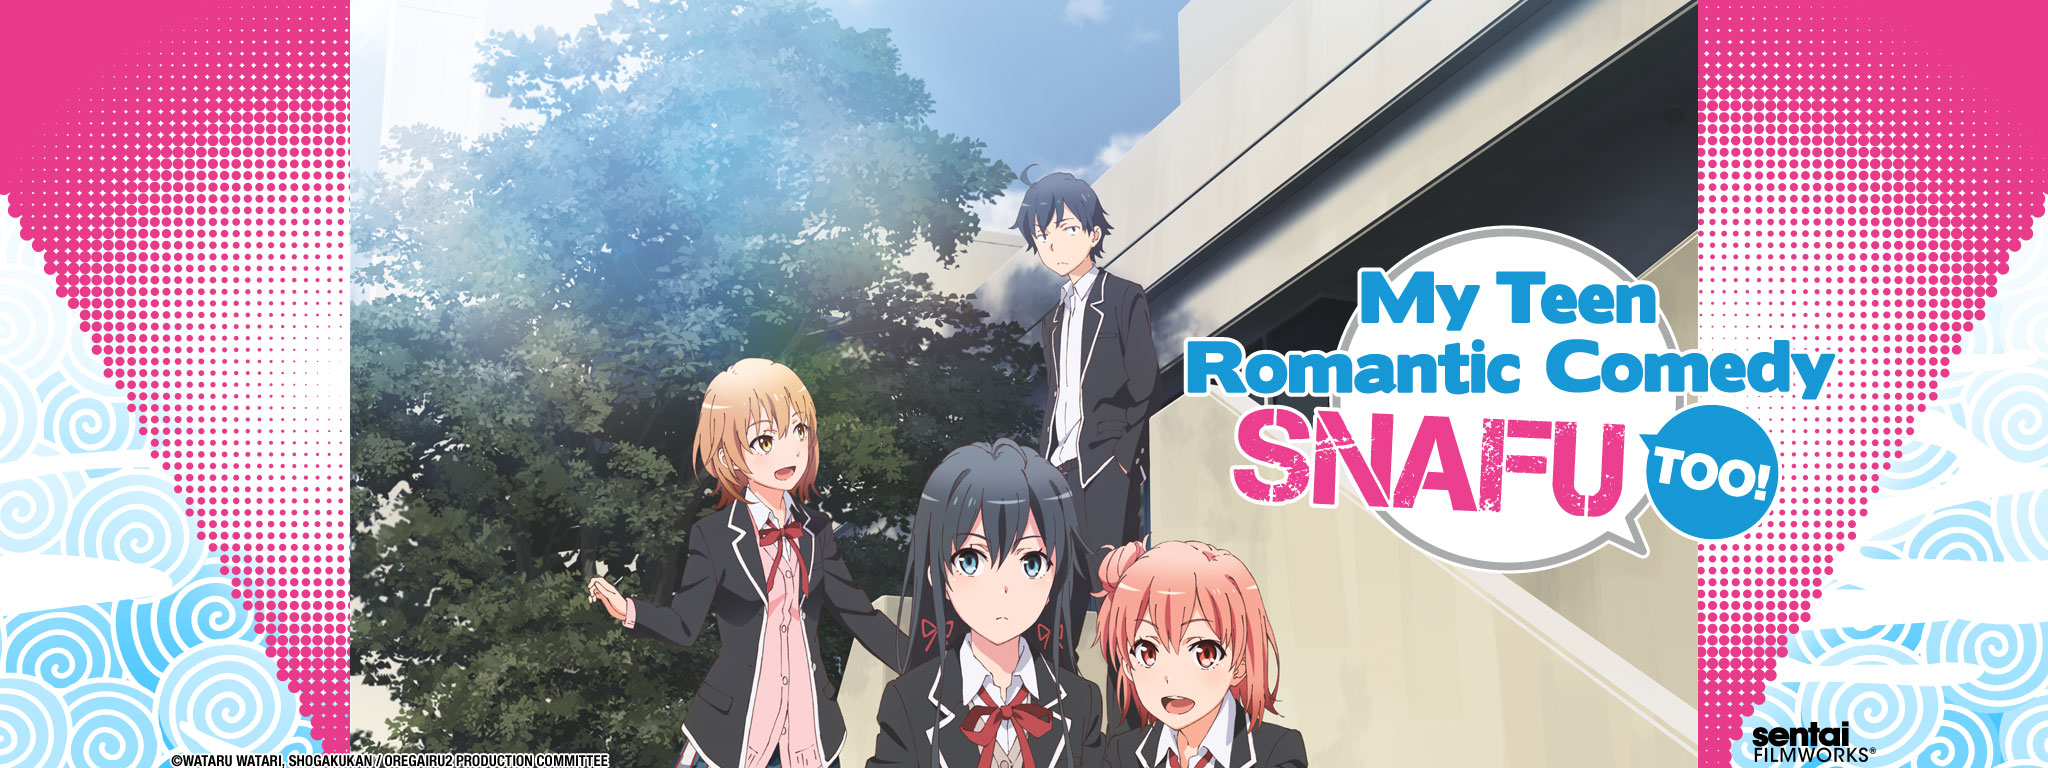 Title Art for My Teen Romantic Comedy SNAFU TOO!